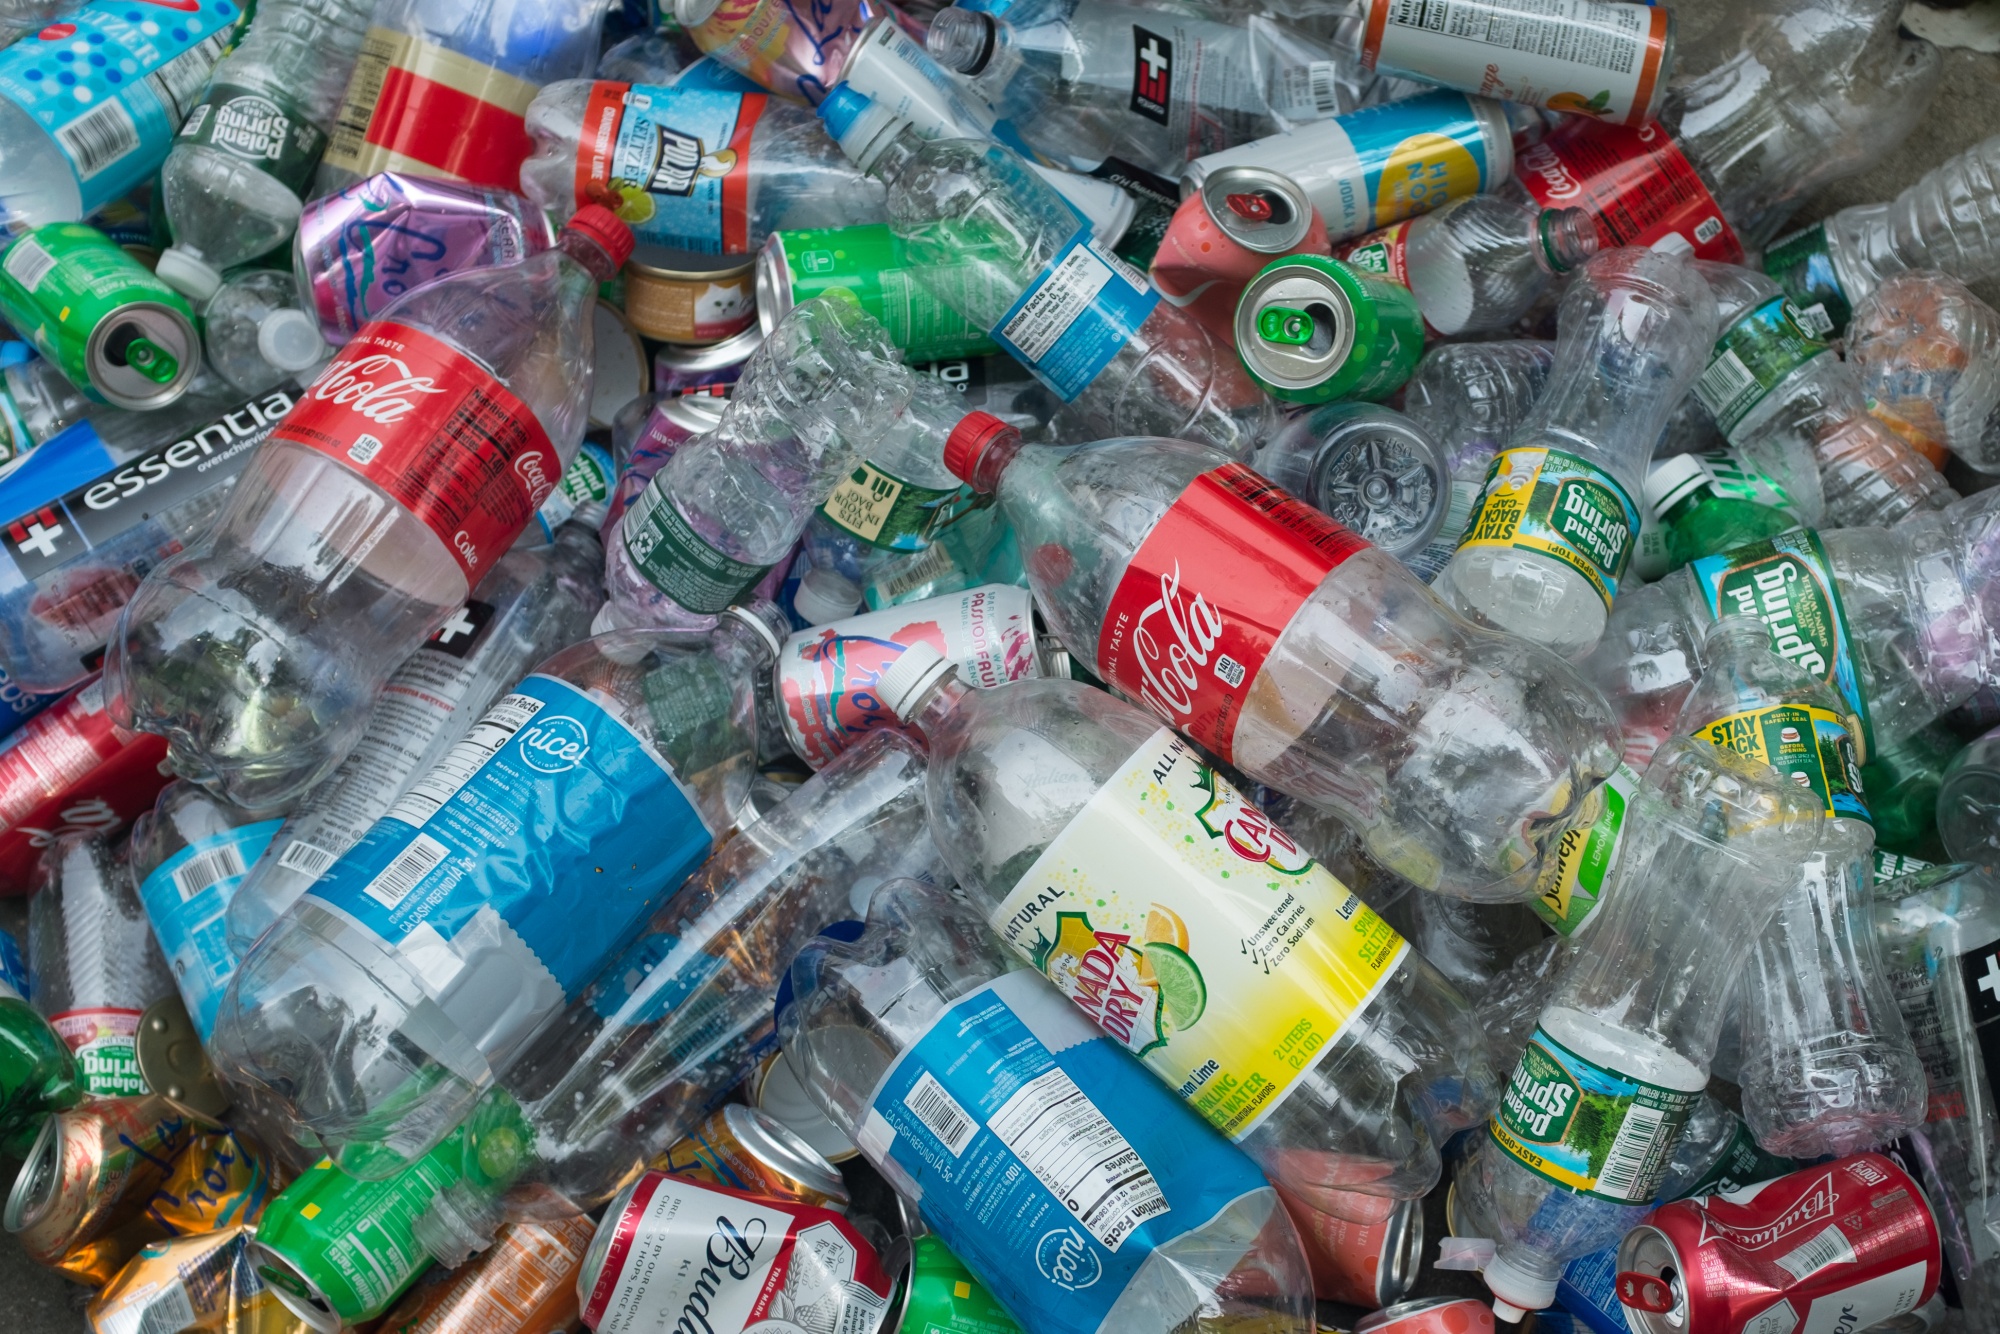 US Store-Drop Off Plastic Recycling Often Ends Up in Landfills - Bloomberg